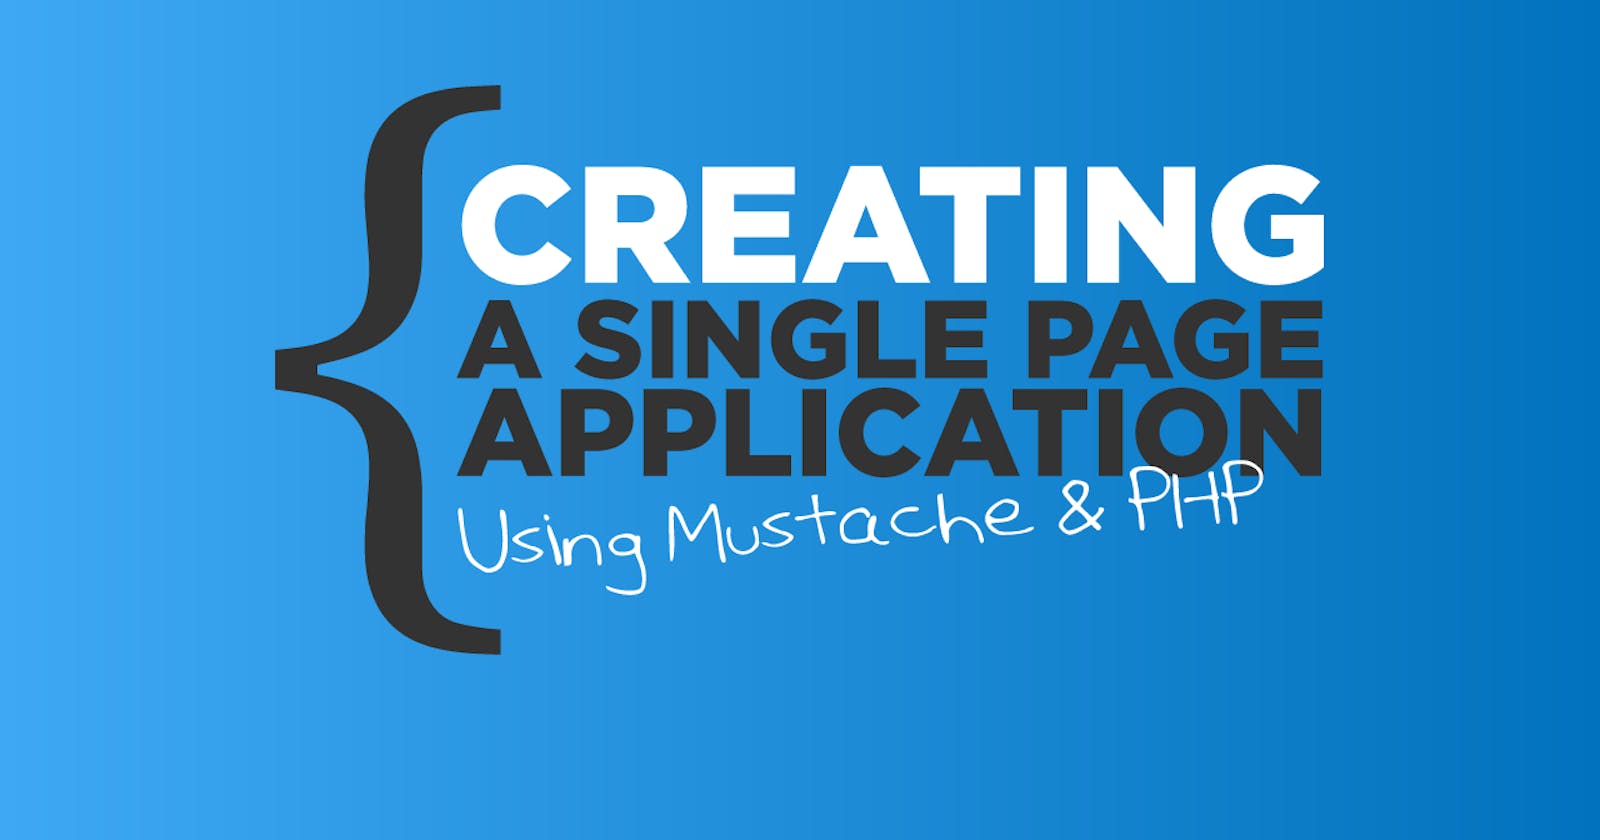 Creating A Single Page Application Using Mustache and PHP